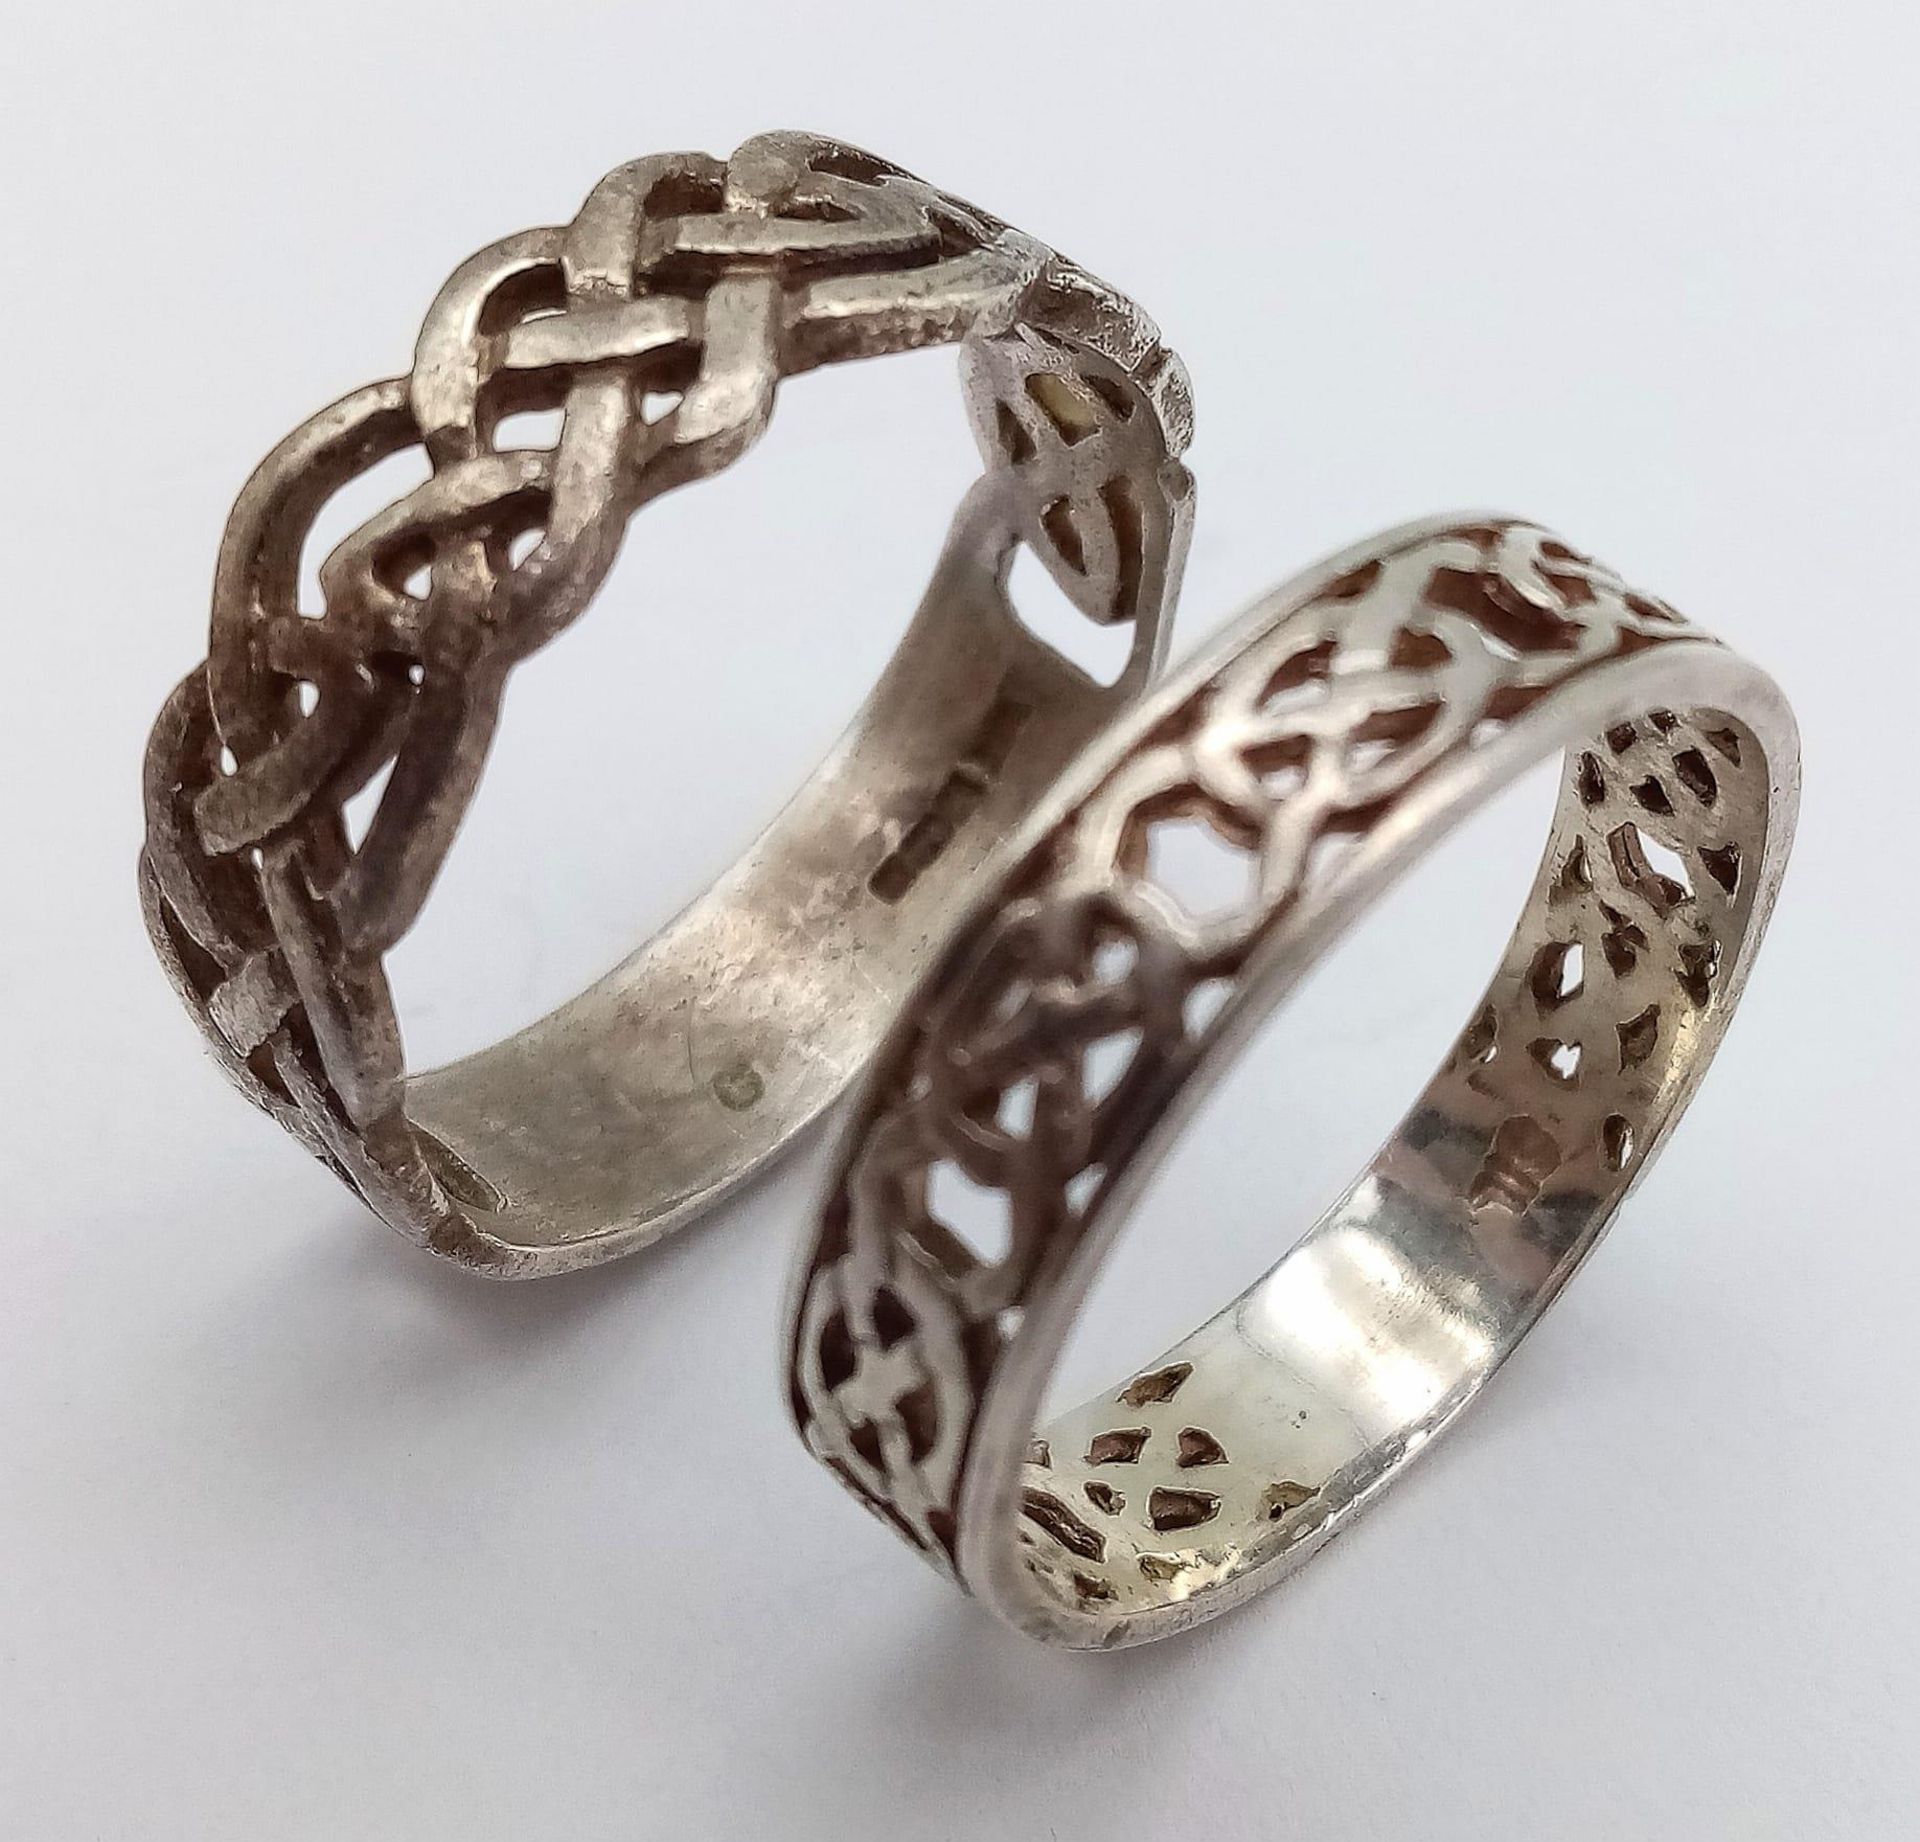 2X vintage sterling siler Celtic knot rings. Total weight 8.1G. Size X, Y. Please see photos for